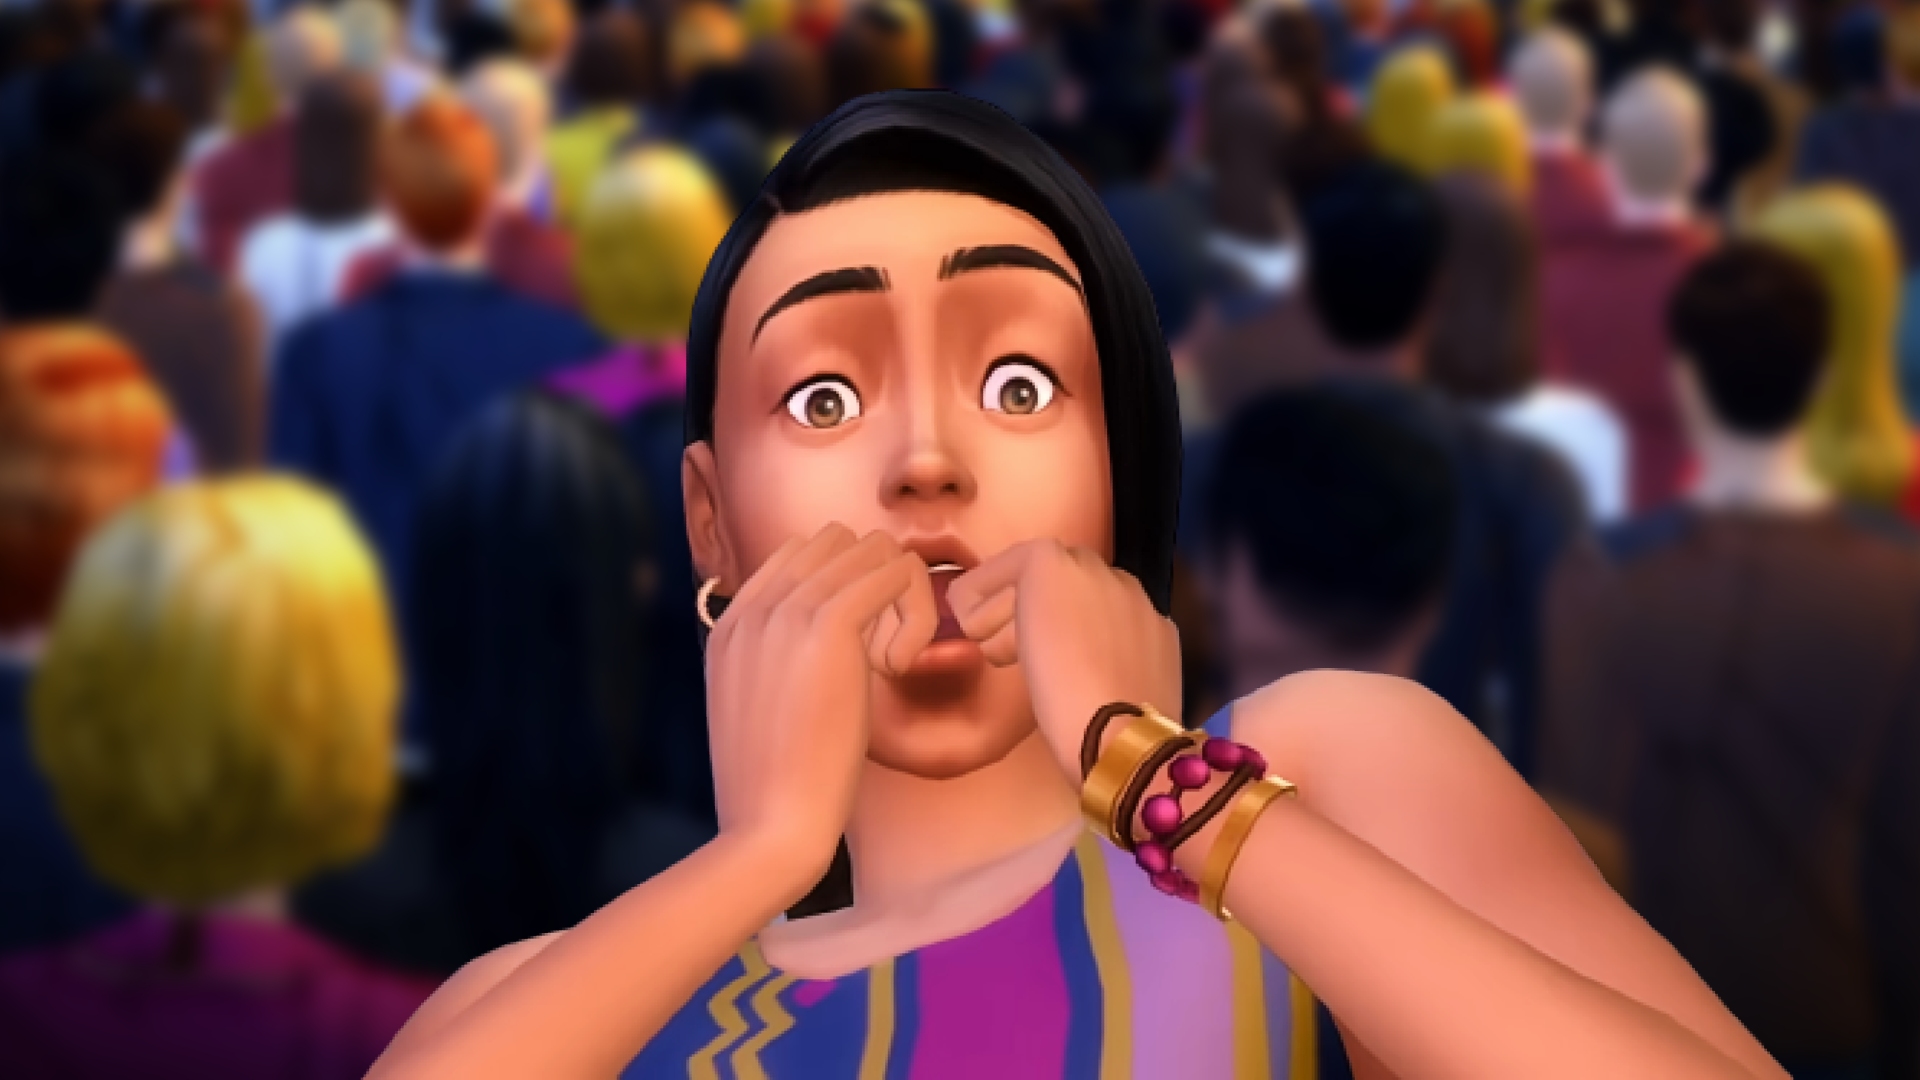 New Sims 4 expansion houses 48 people in one plot, and it's chaos